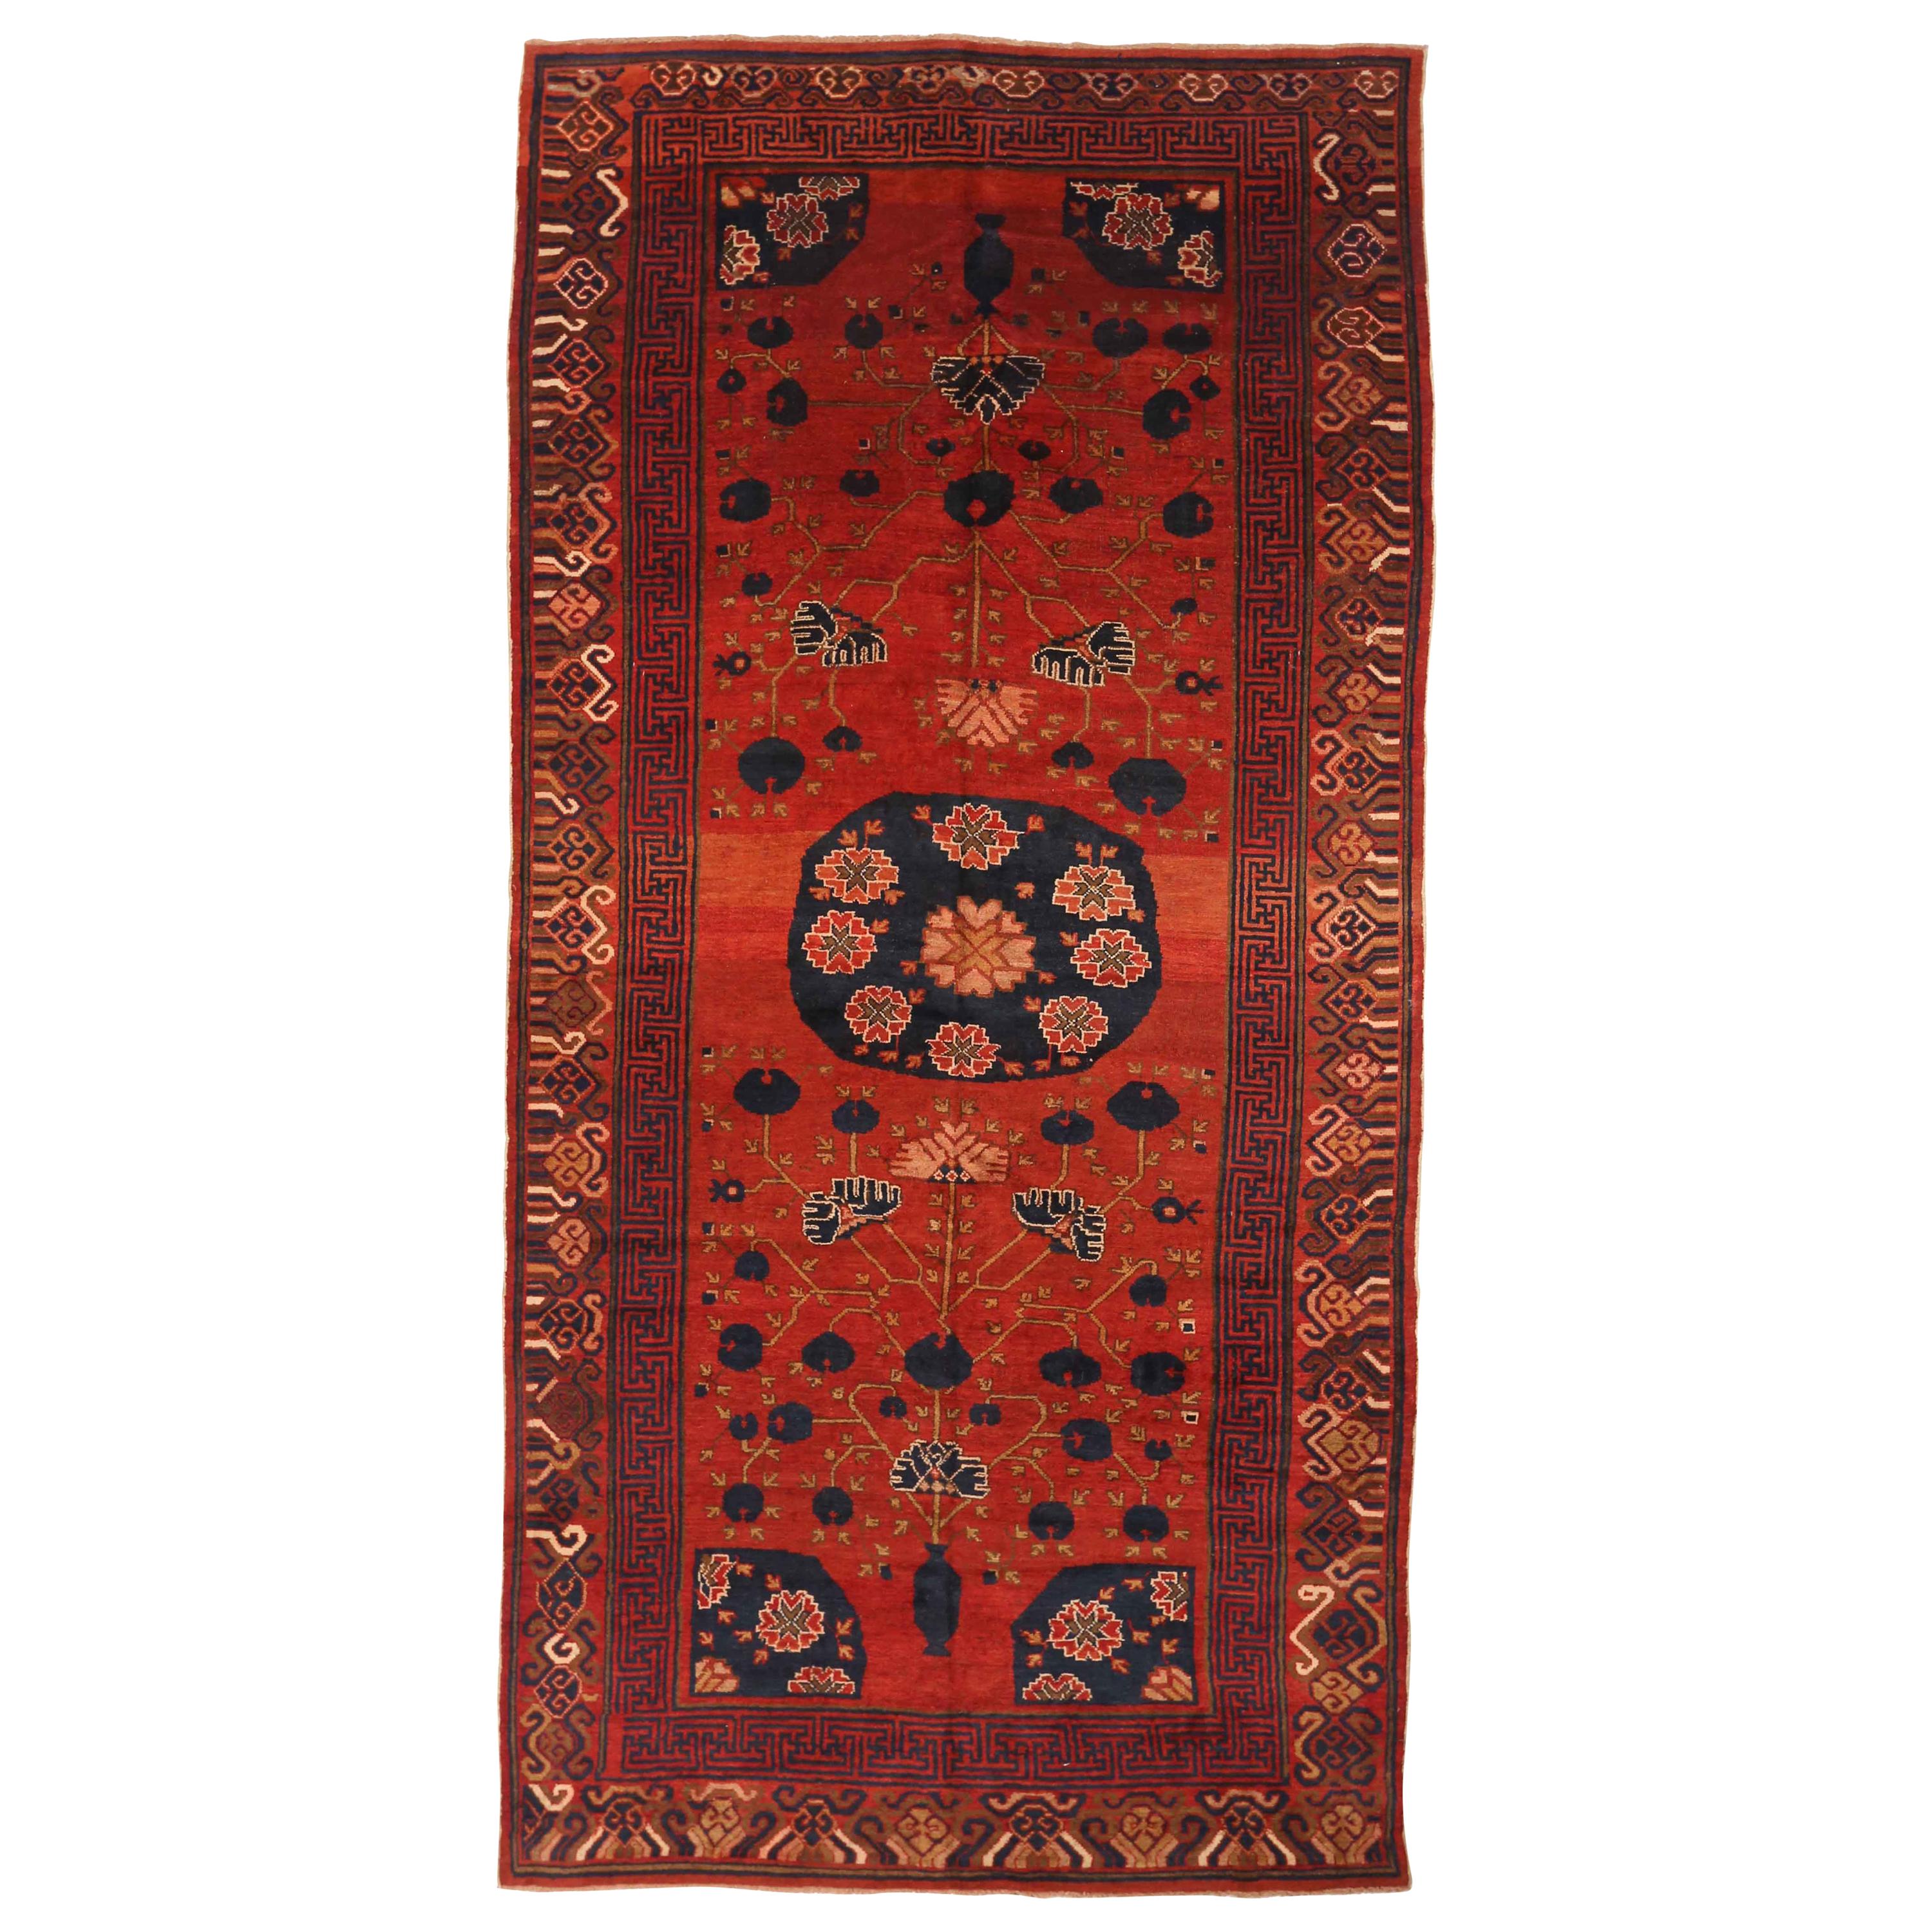 Antique Central Asian Rug Khoy Style with Lotus in Red Pond Details, circa 1980s For Sale